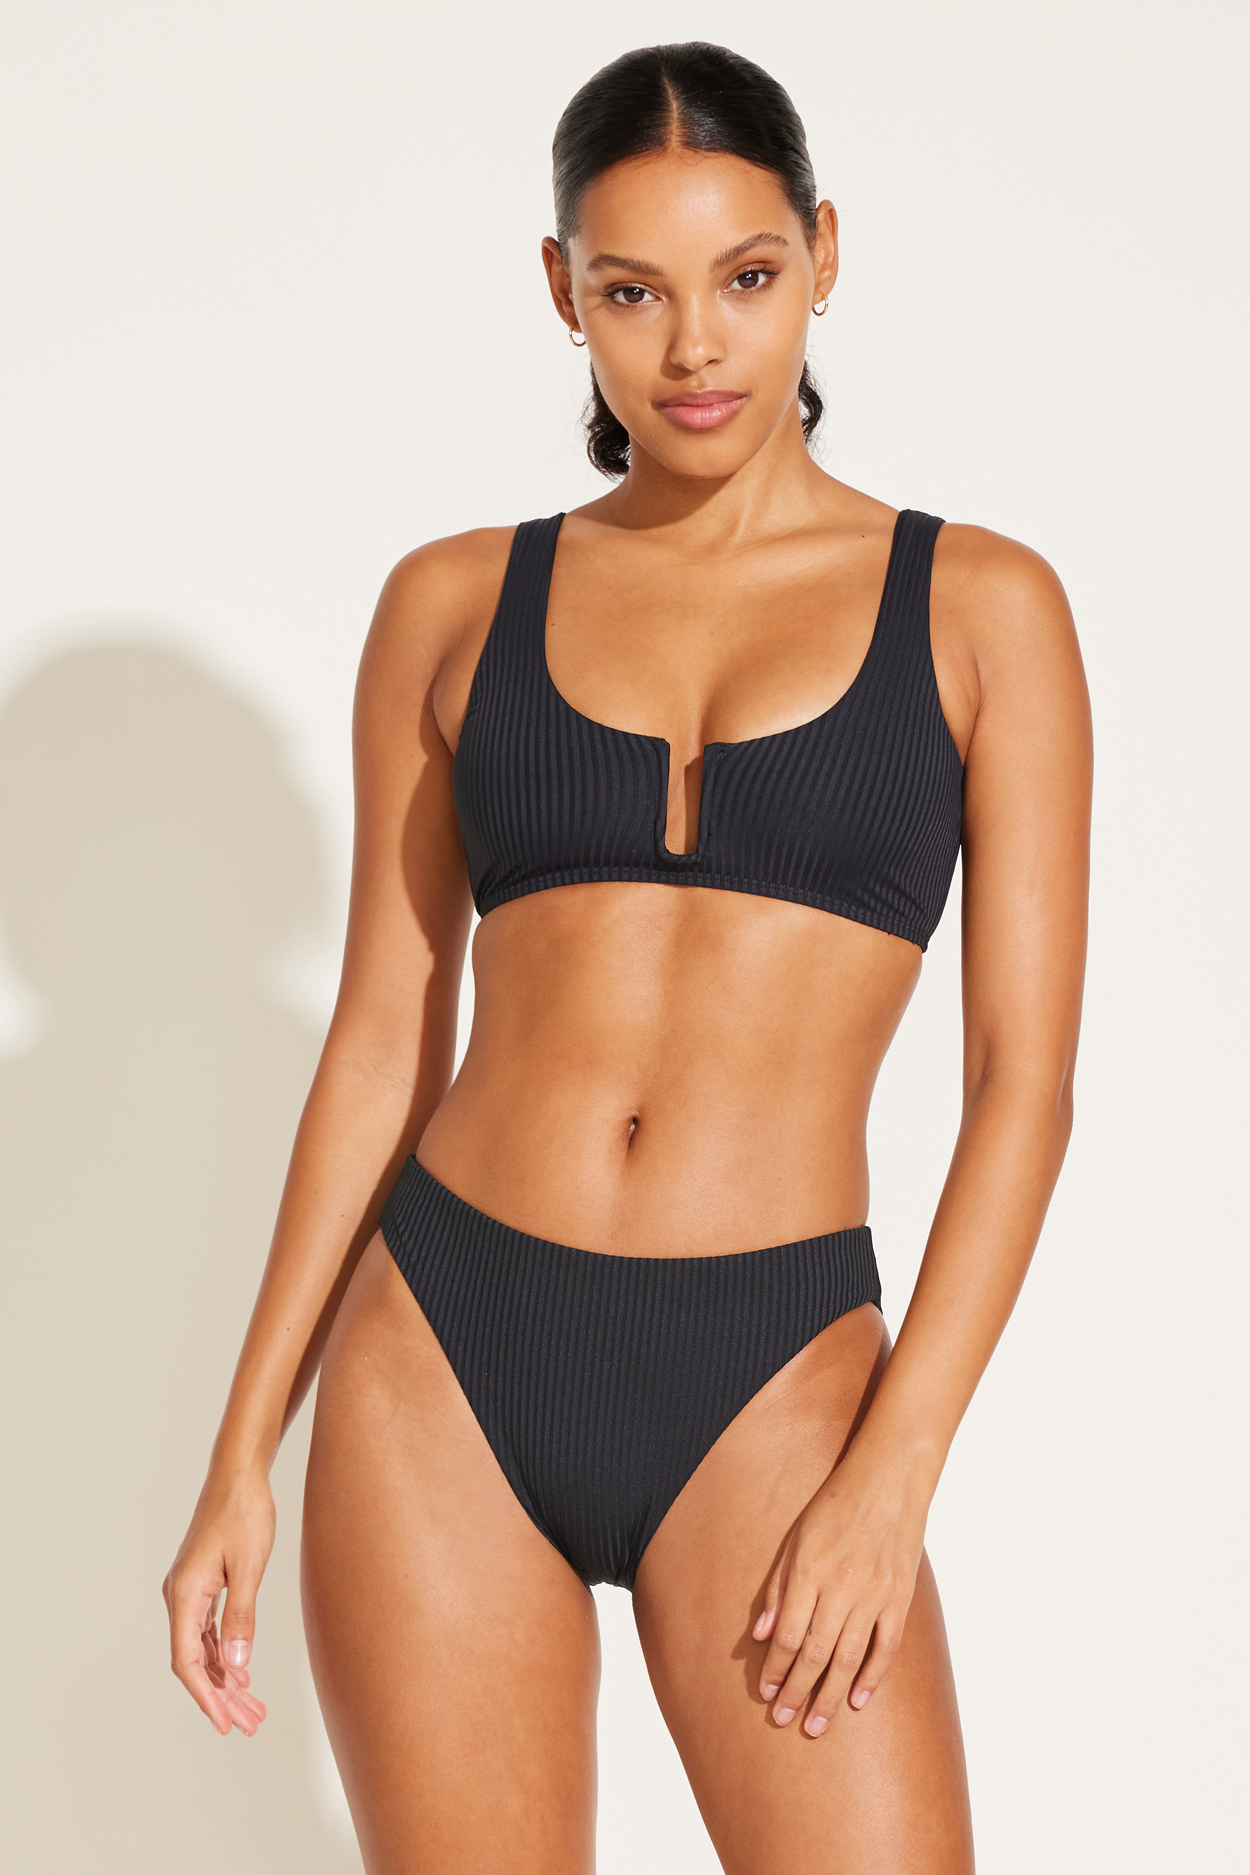 How to Choose The Best Bikini For a Smaller Bust – ALT SWIM